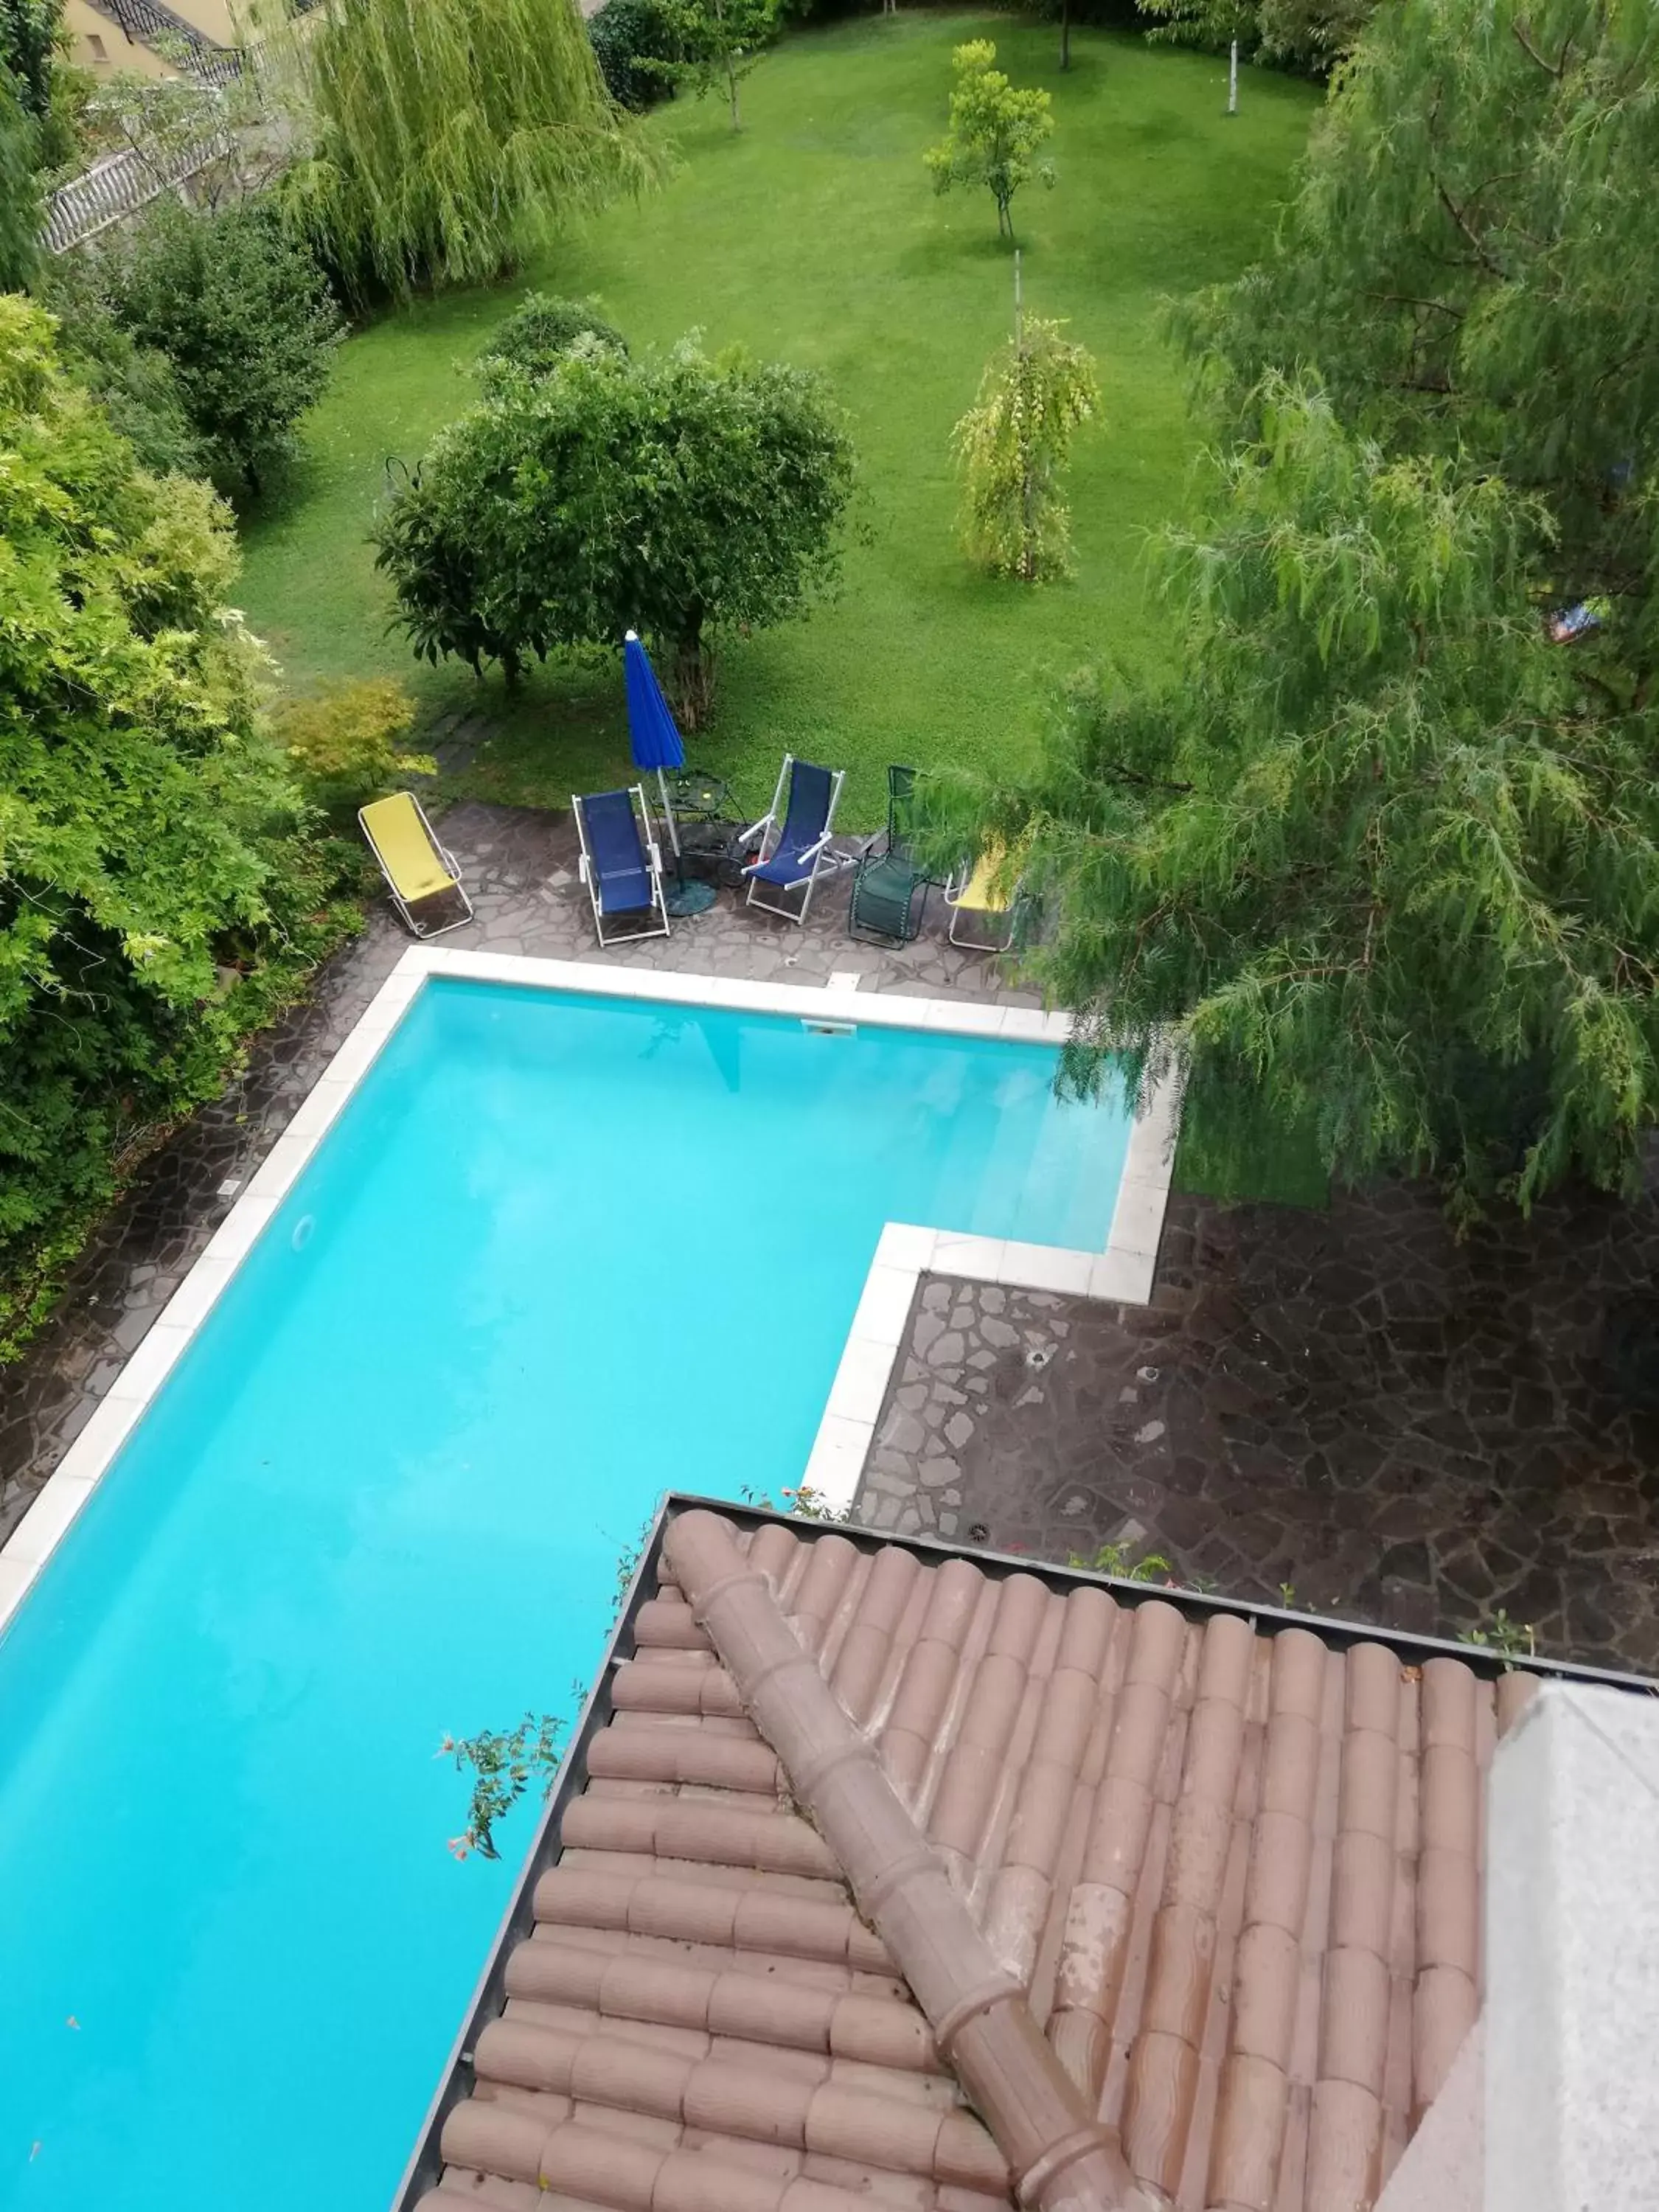 Property building, Pool View in B&B Il Sognatore